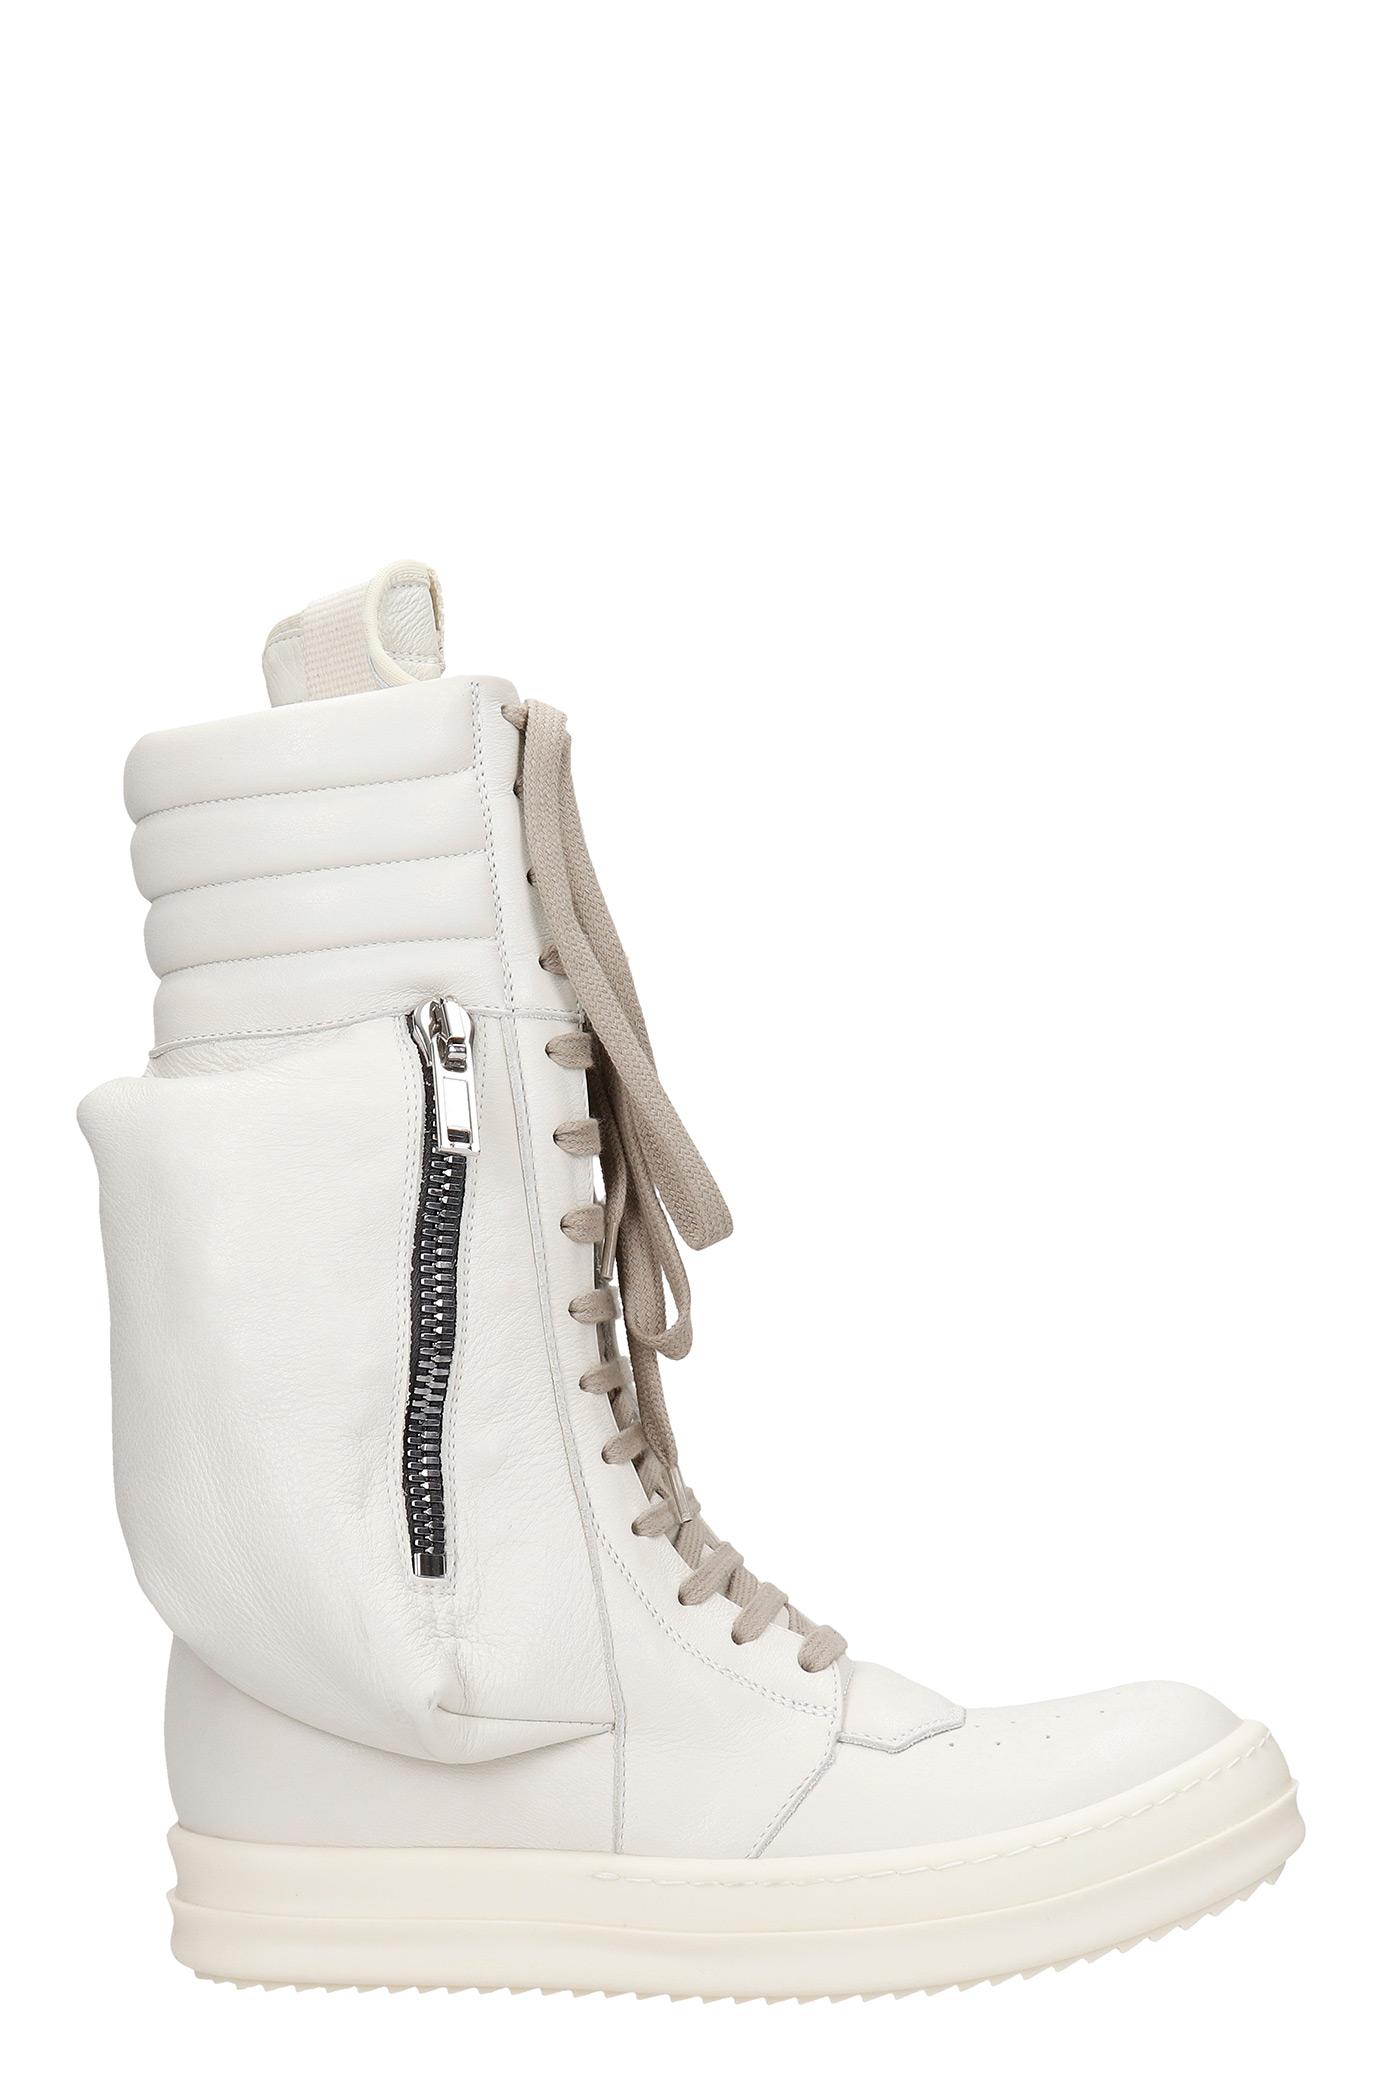 Rick Owens Cargo Basket Sneakers In White Leather | Lyst